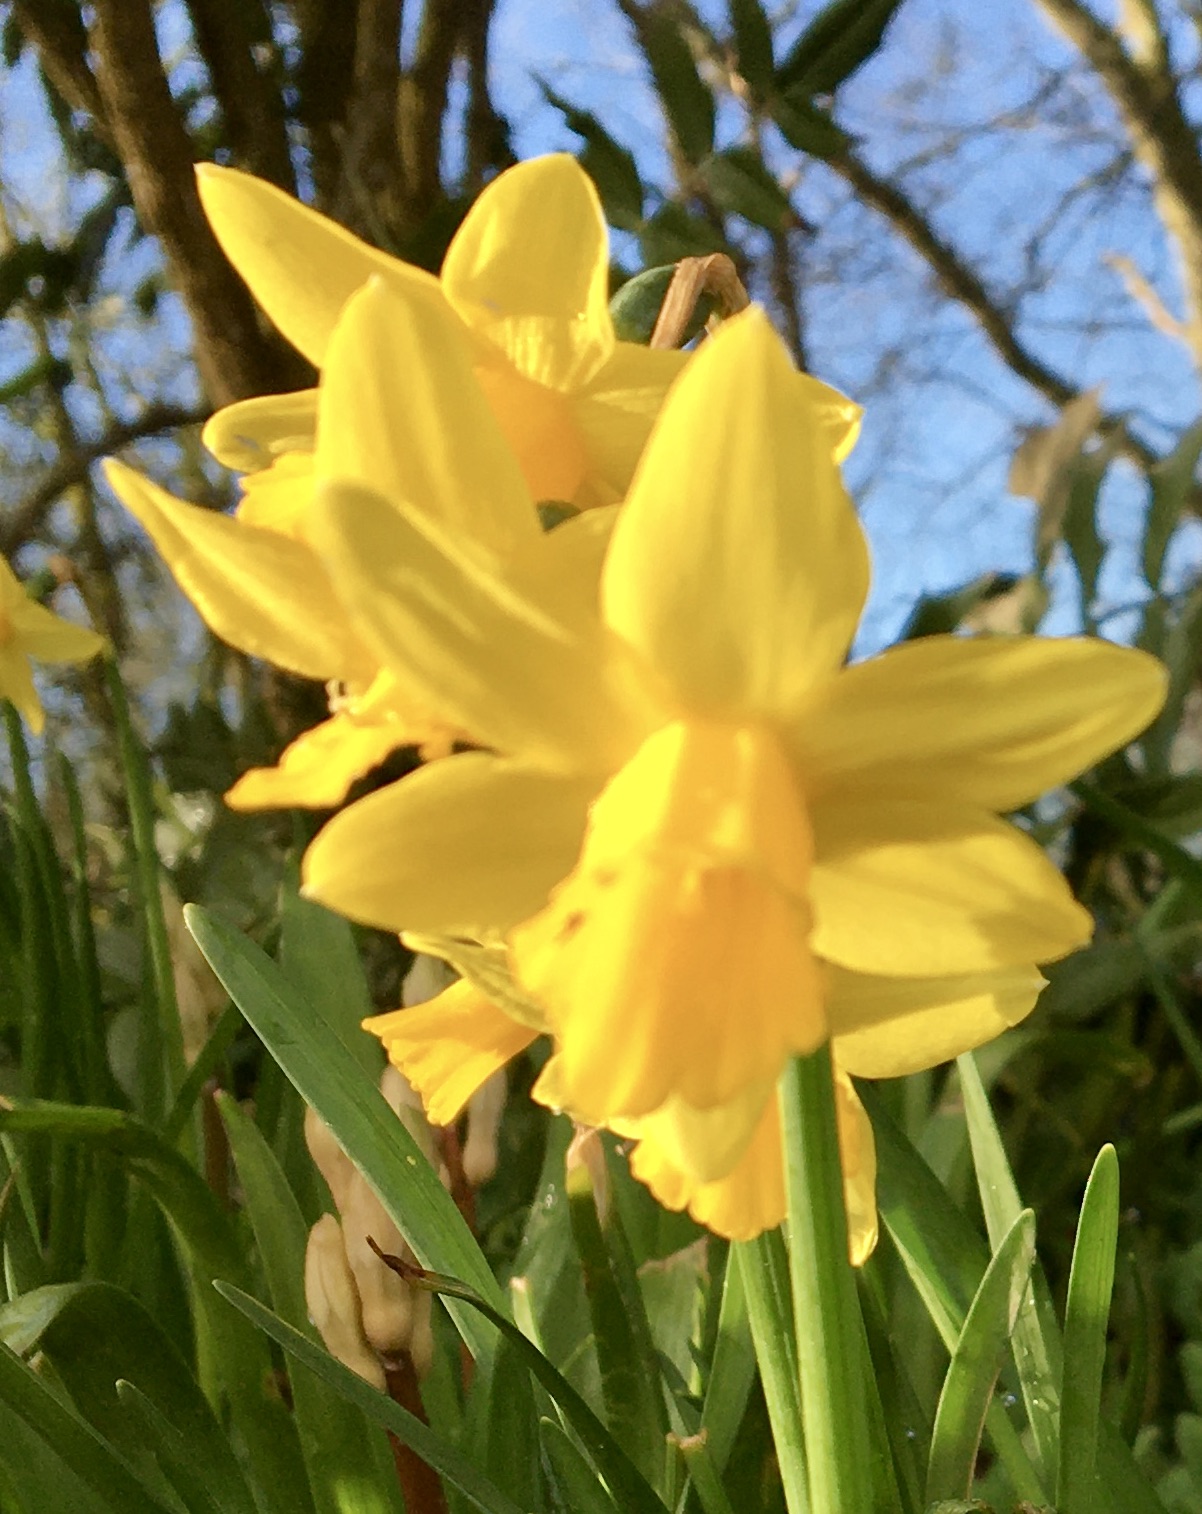 Close up of yellow daffodil heads against blue sky.